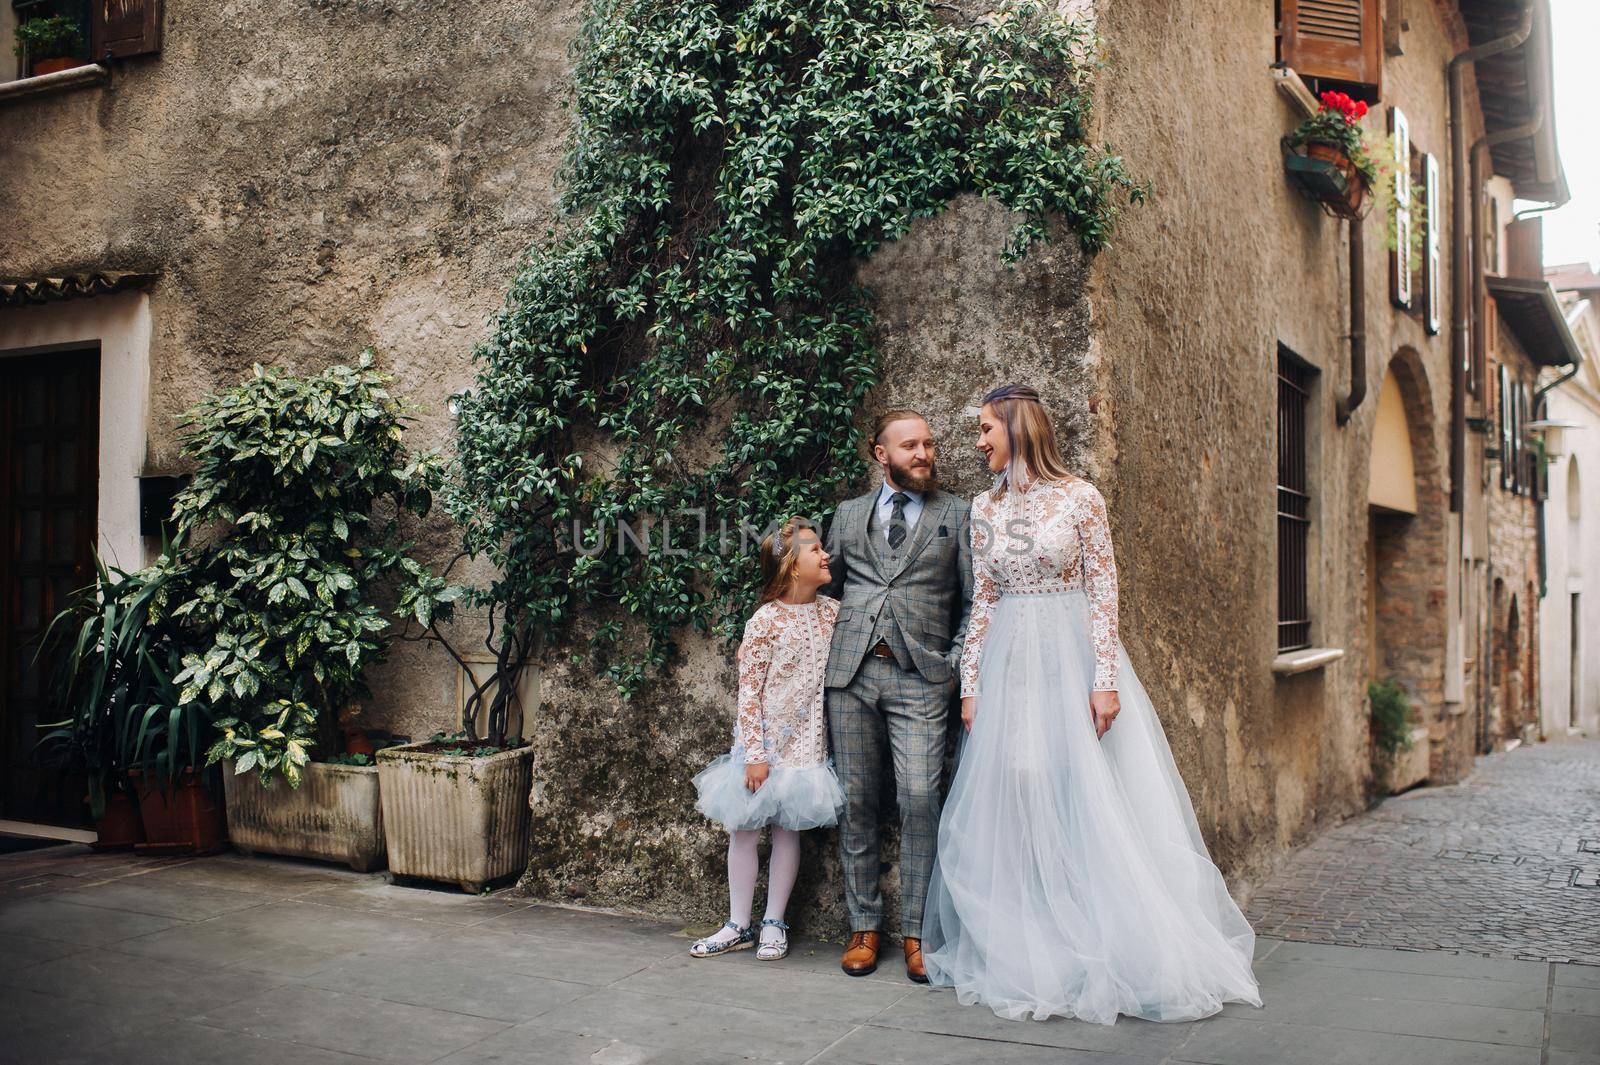 A happy young family walks through the old town of Sirmione in Italy.Stylish family in Italy on a walk by Lobachad